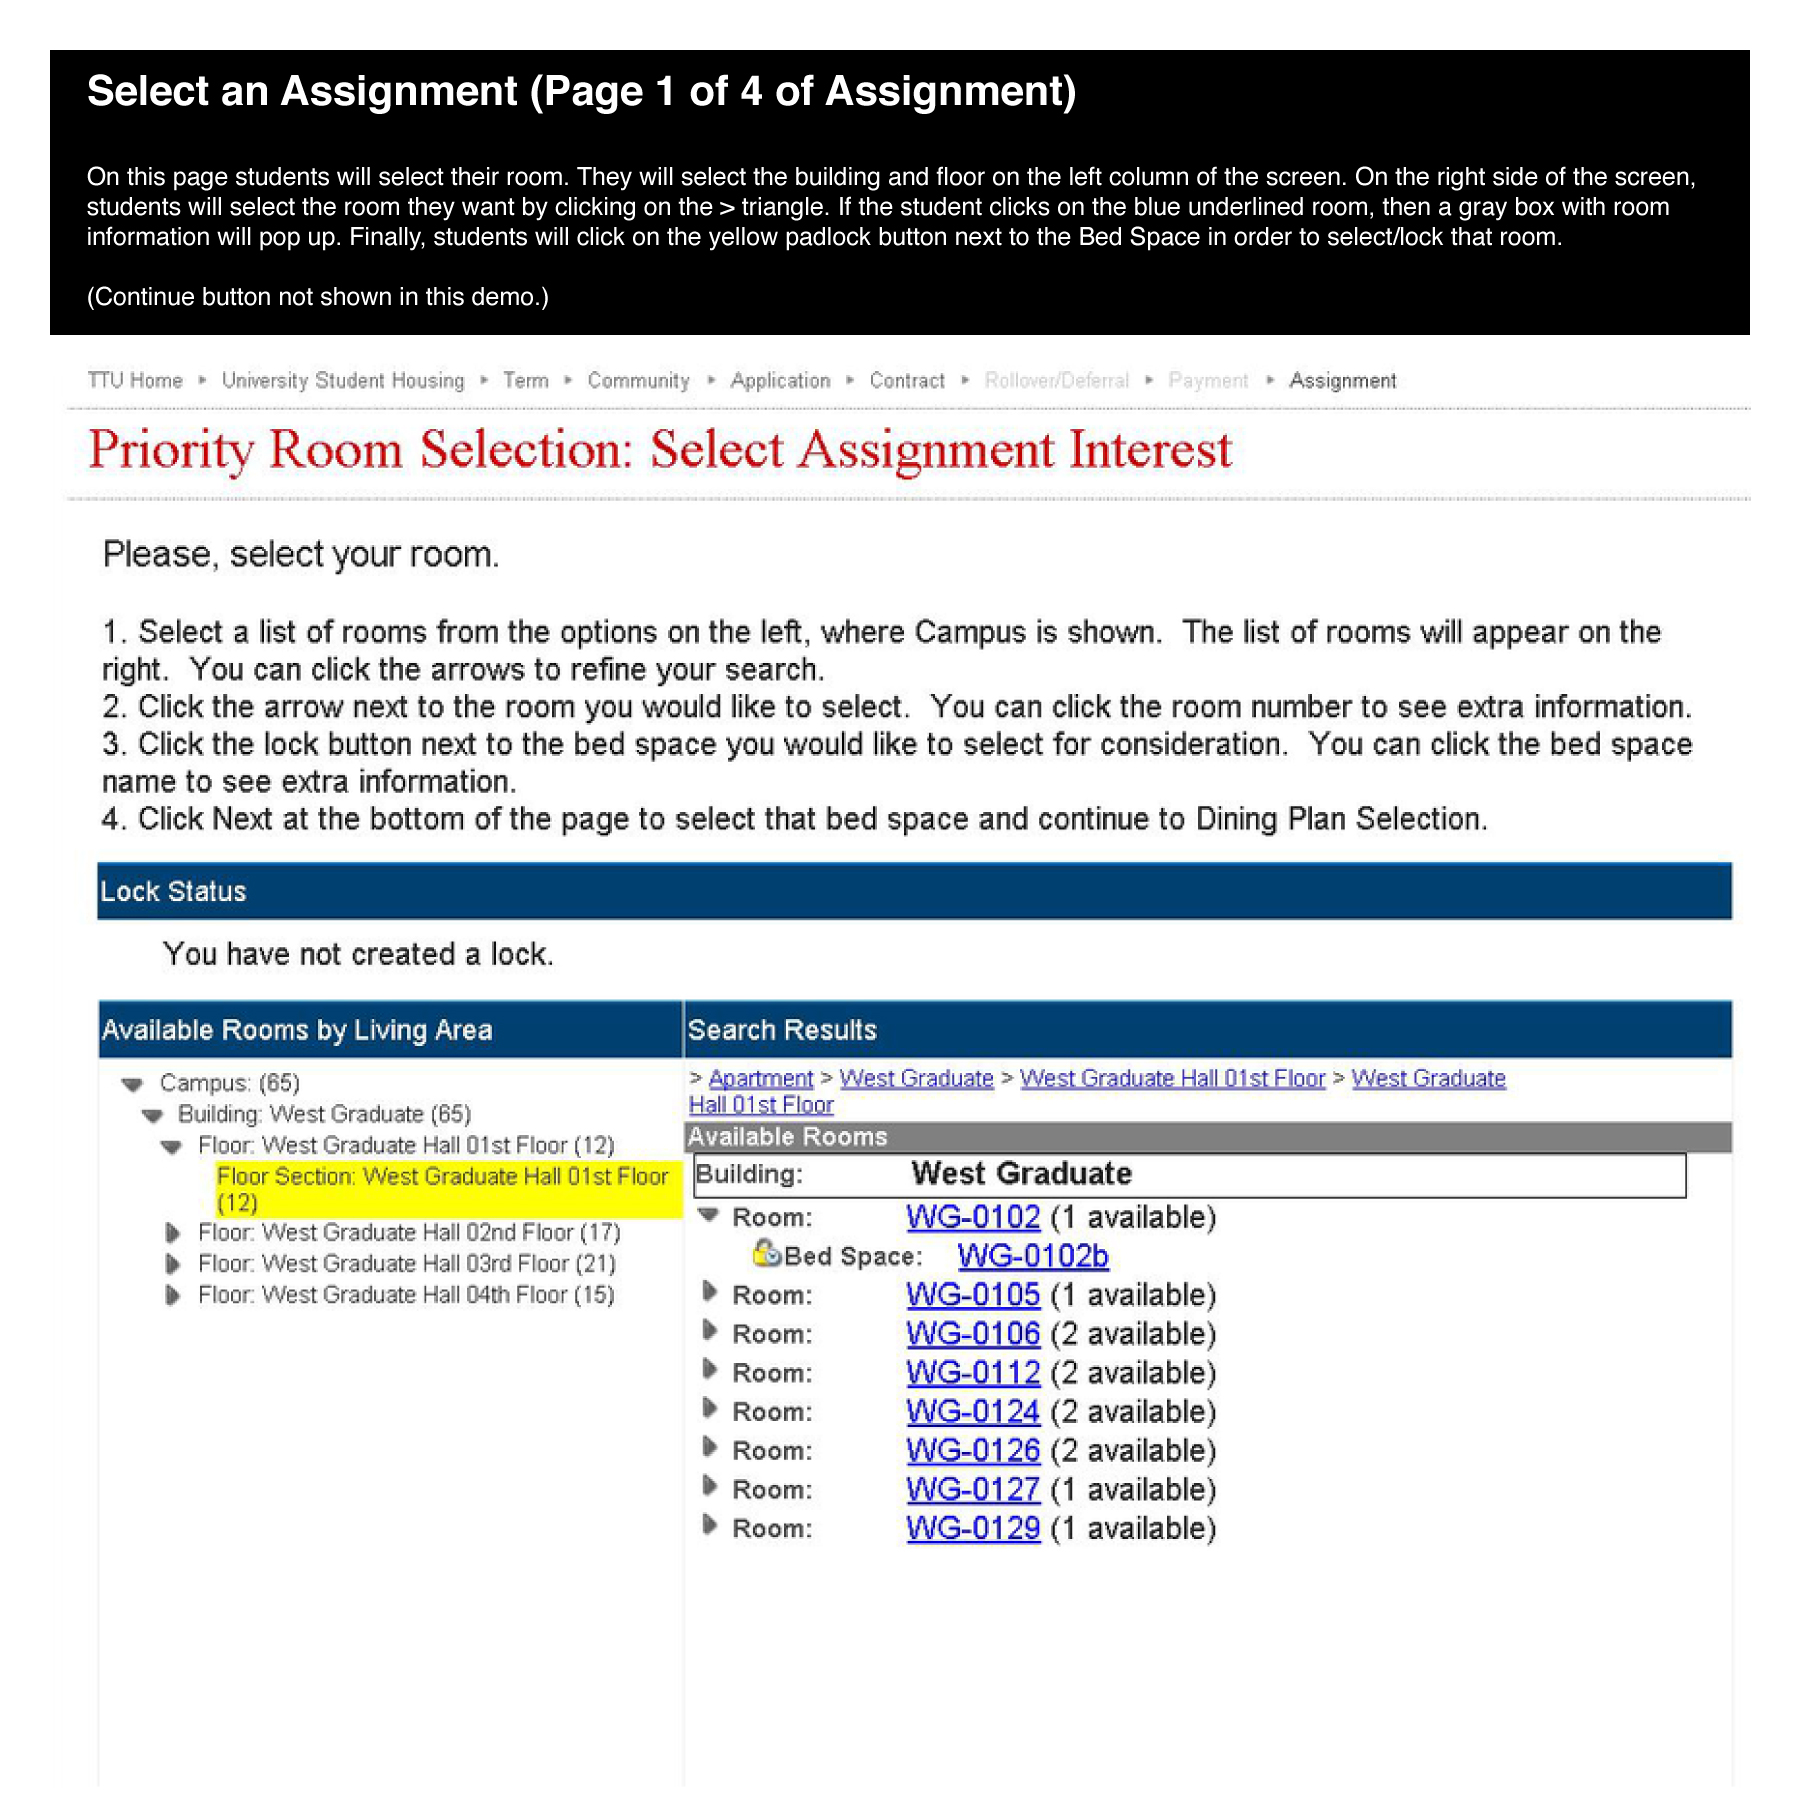 Select an Assignment (Page 1 of 4 of Assignment) On this page students will select their room. They will select the building and floor on the left column of the screen. On the right side of the screen, students will select the room they want by clicking on the > triangle. If the student clicks on the blue underlined room, then a gray box with room information will pop up. Finally, students will click on the yellow padlock button next to the Bed Space in order to select/lock that room.  (Continue button not shown in this demo.)